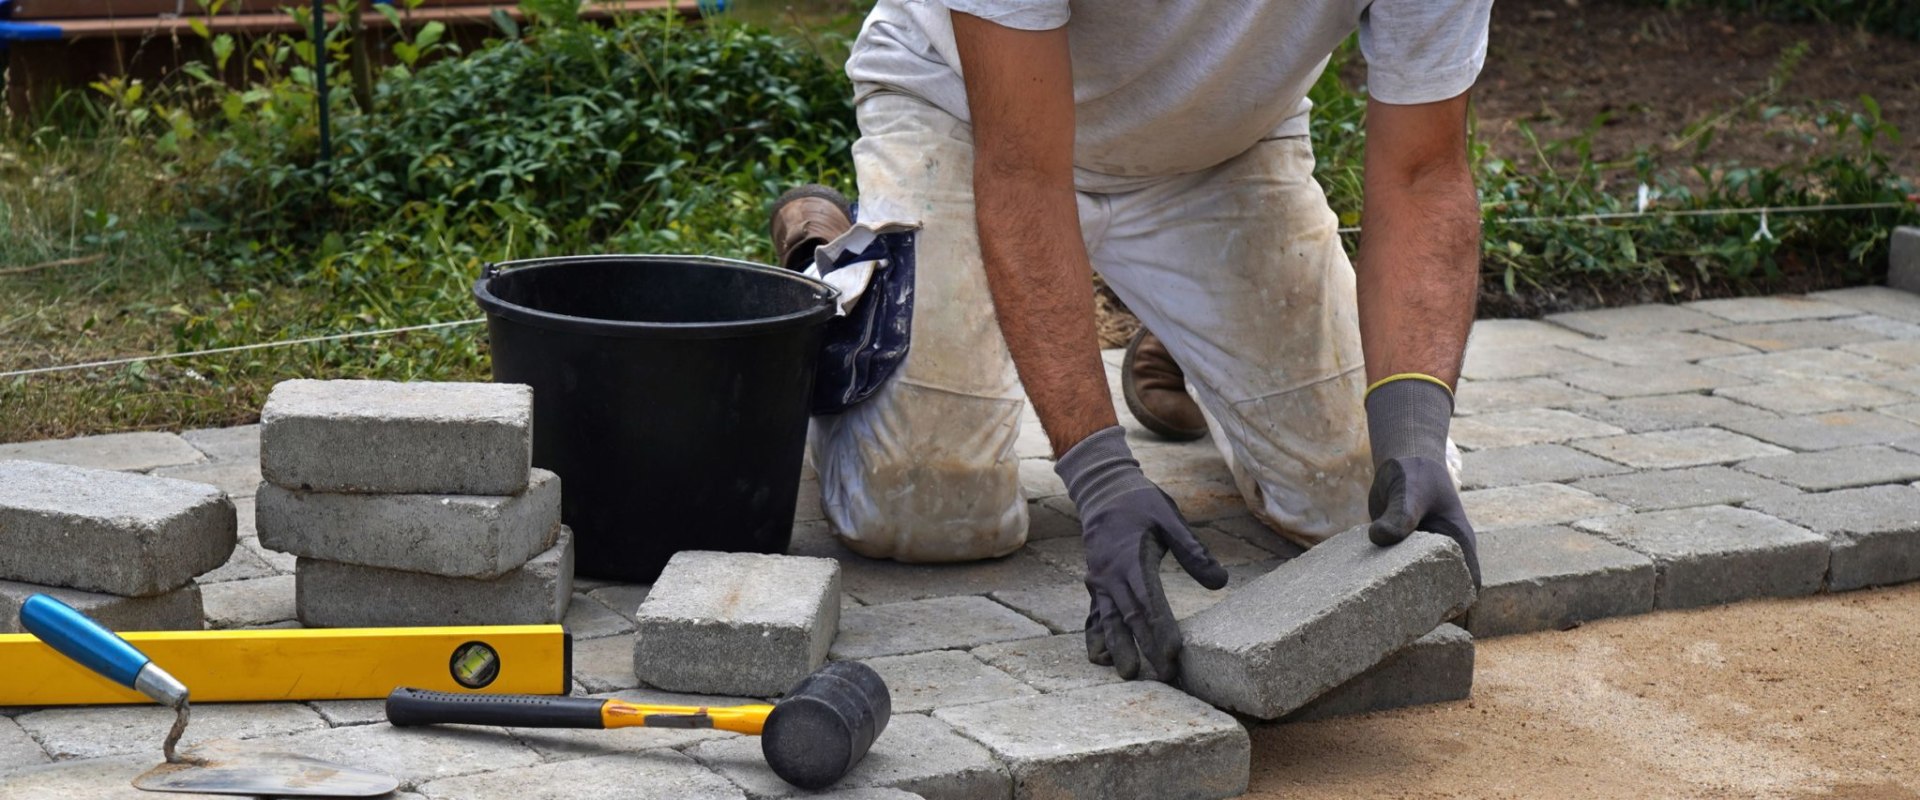 Secure Your Pavers and Avoid Common Installation Mistakes